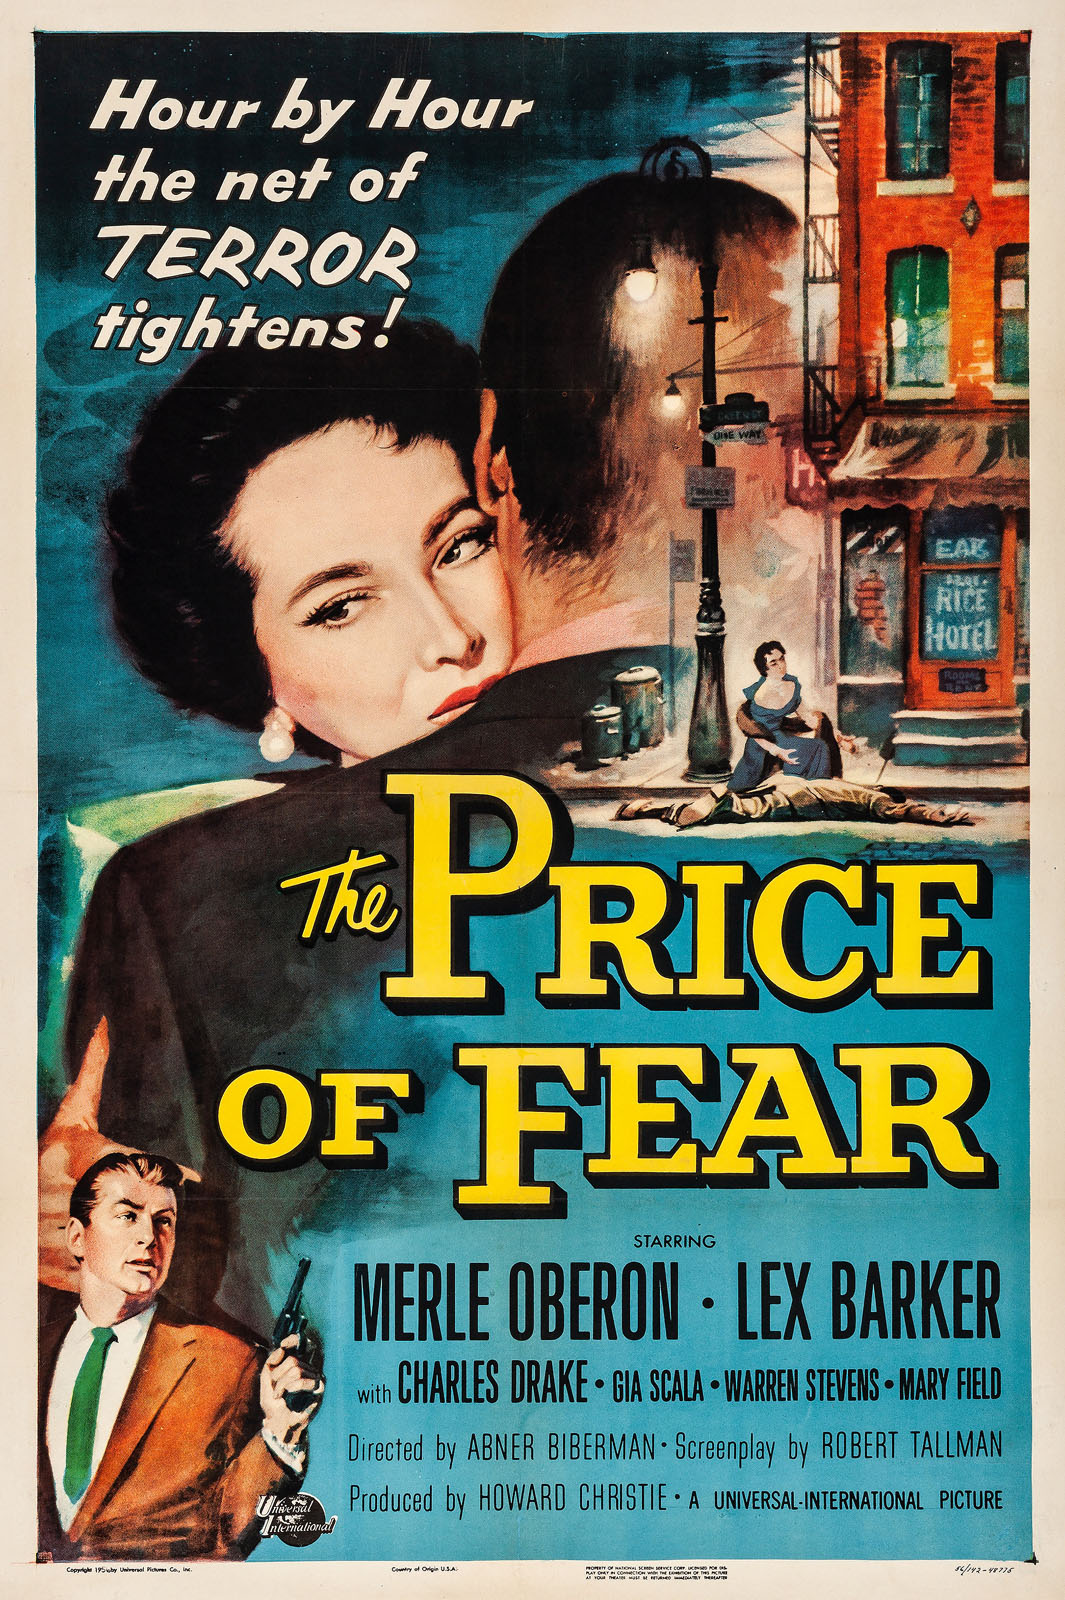 PRICE OF FEAR, THE